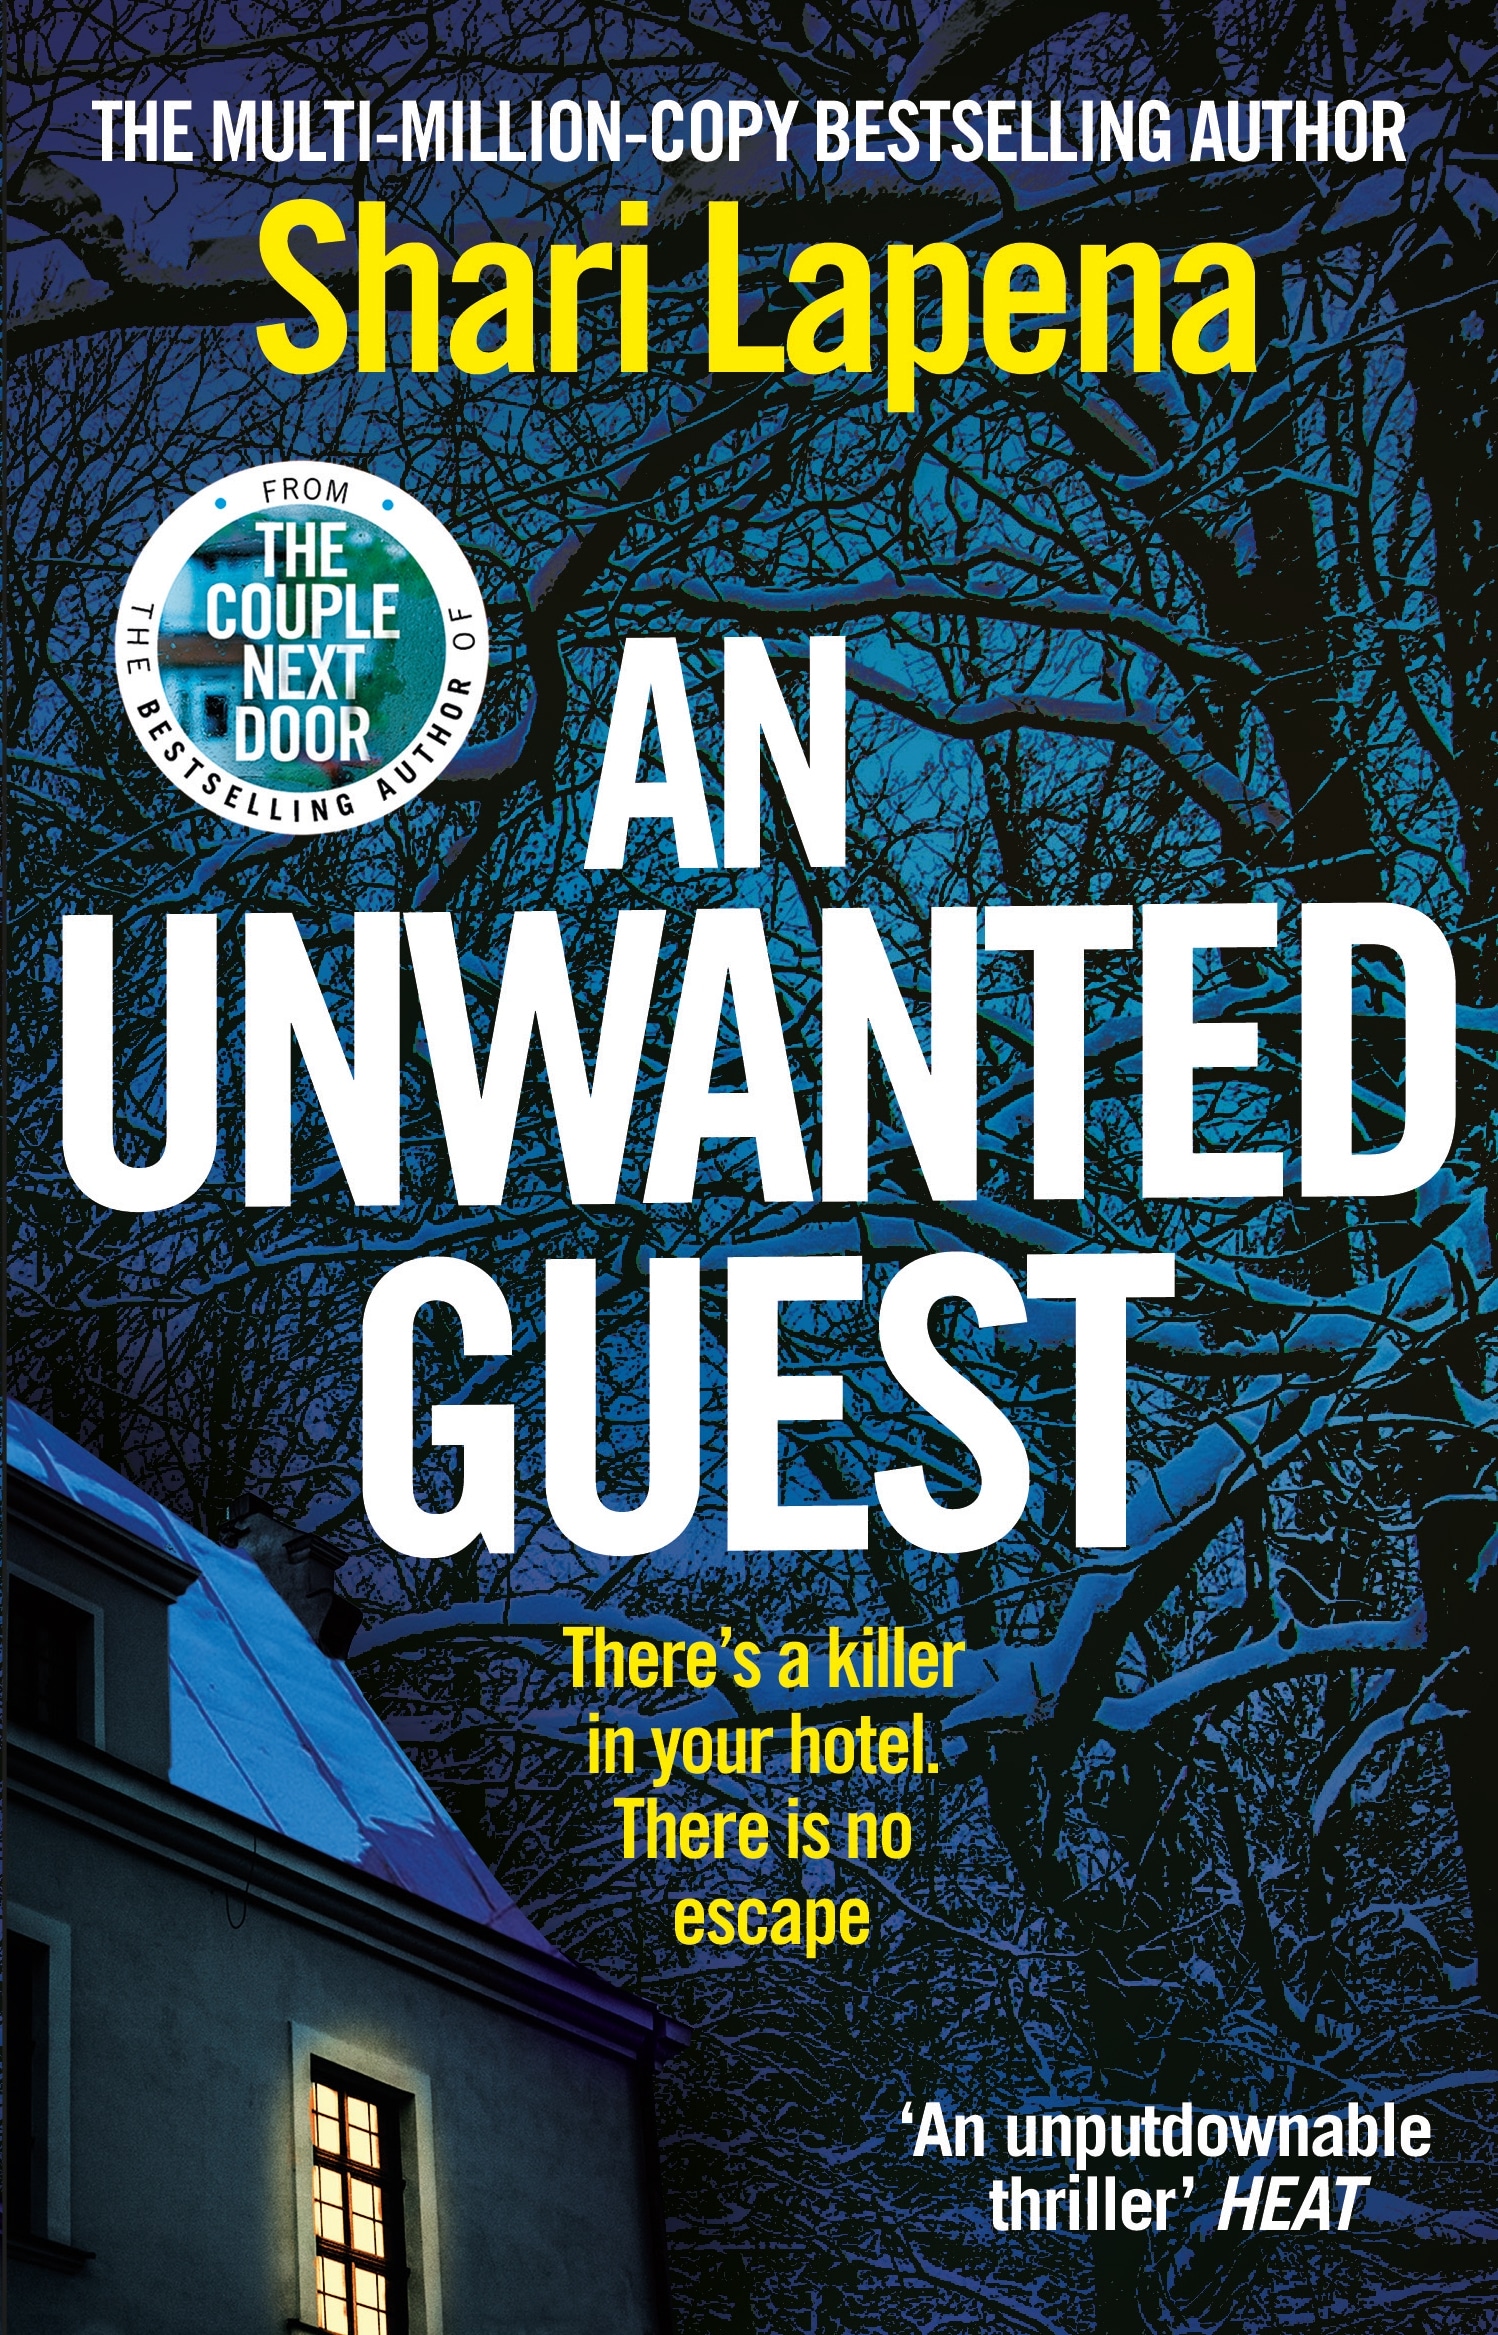 Book “An Unwanted Guest” by Shari Lapena — May 16, 2019